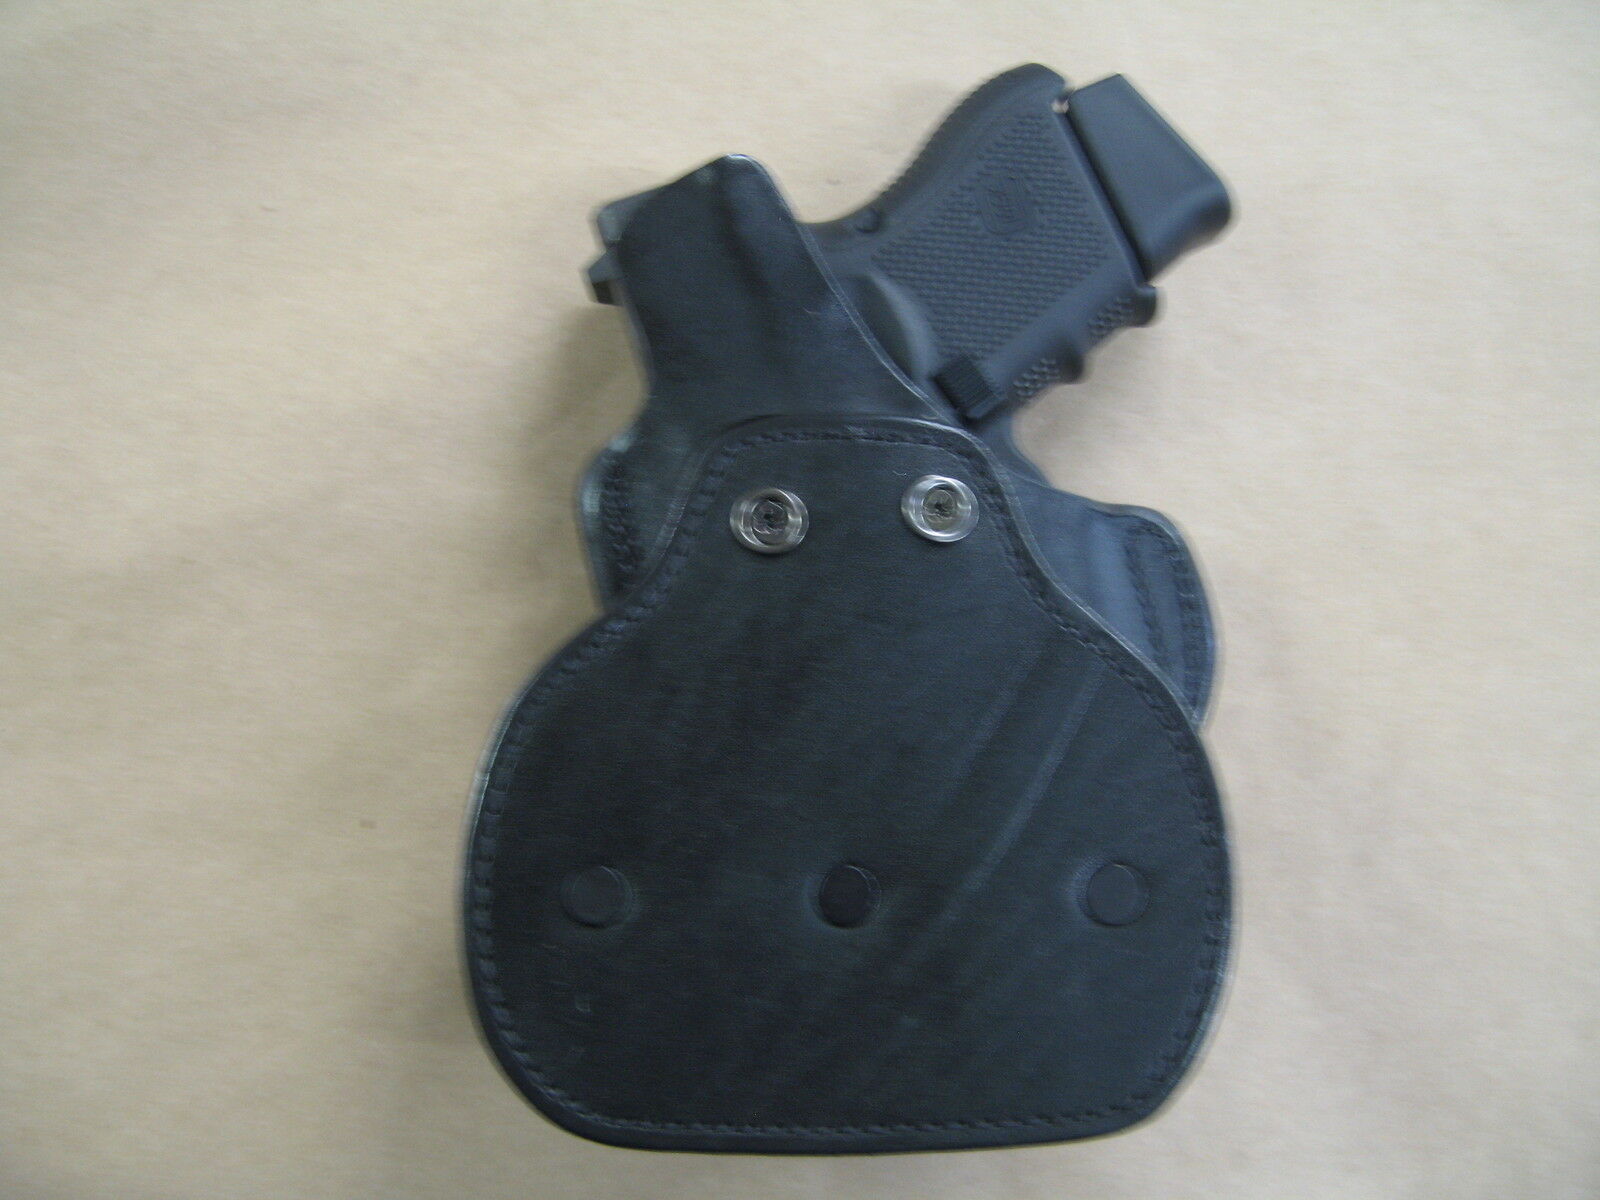 Bersa Thunder 45 Ultra Comp Pro 3.6" BBL #1067# Leather OWB Paddle Holster Fits